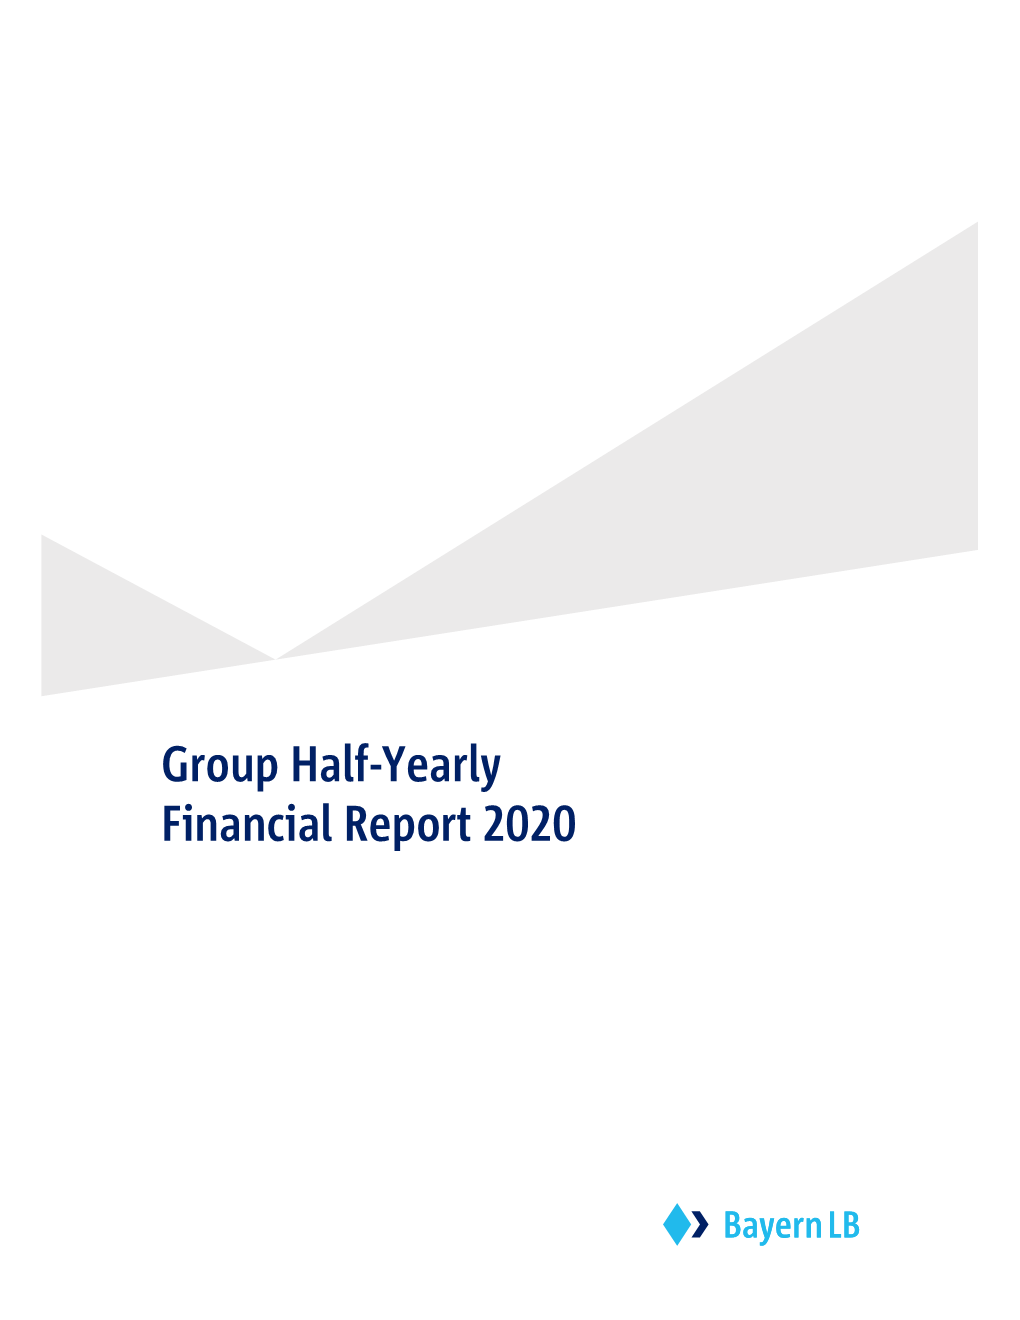 Group Half-Yearly Financial Report 